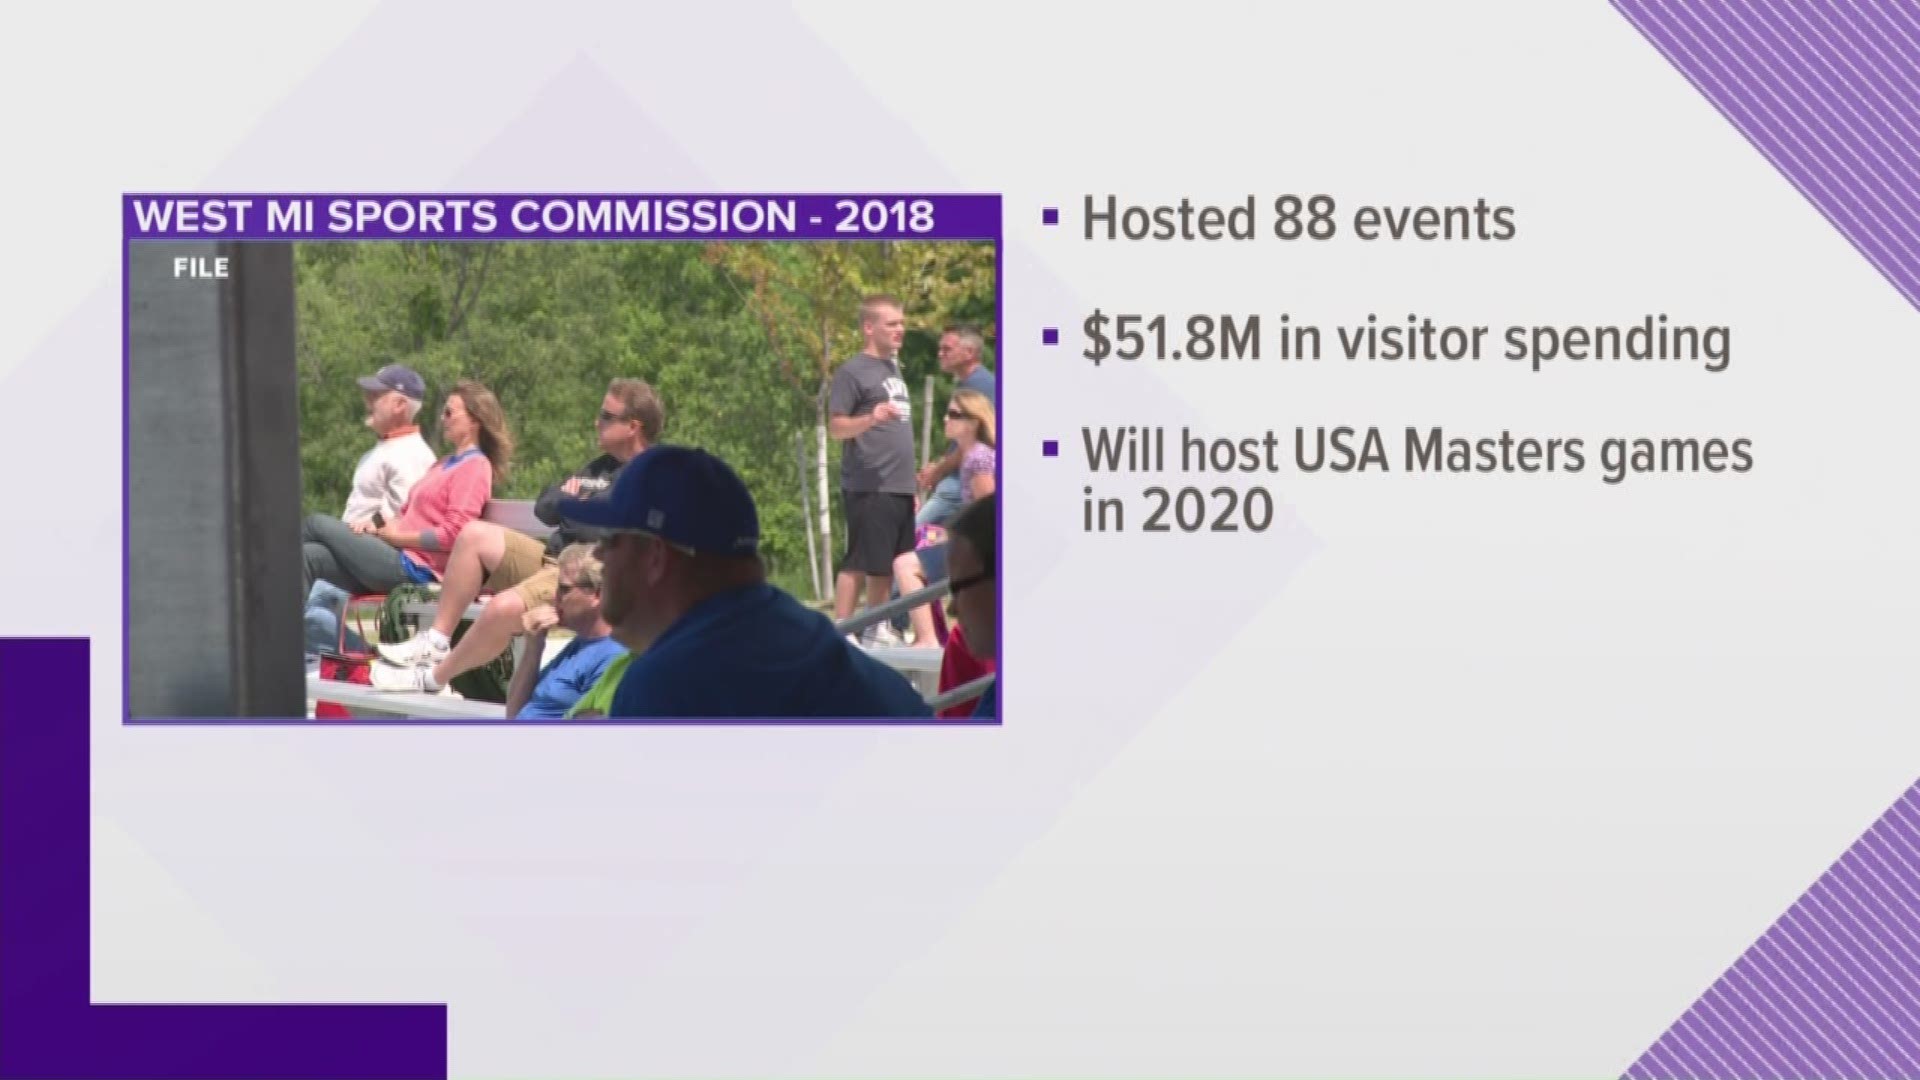 West Michigan Sports Commission hosted 88 events in 2018